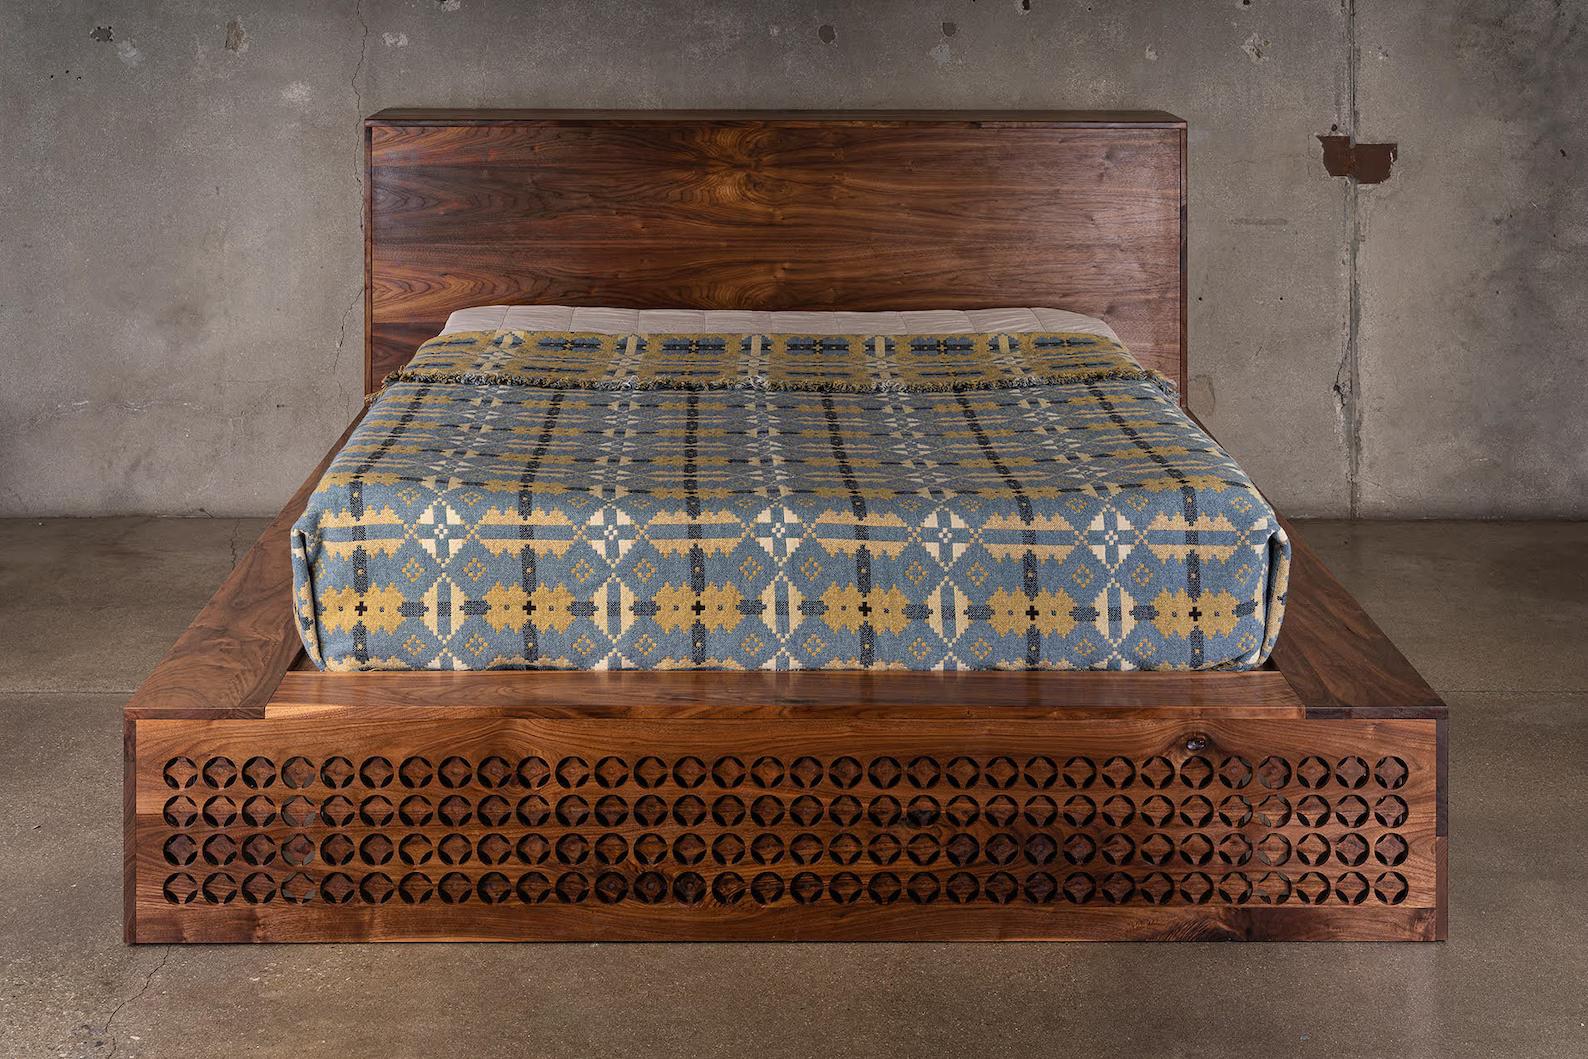 The Hing Bed is a true labor of love. The pattern in the wood is made from a series of overlapping holes carved into the wood. The bed featured here was built from black walnut. The overall footprint for a queen is about 78